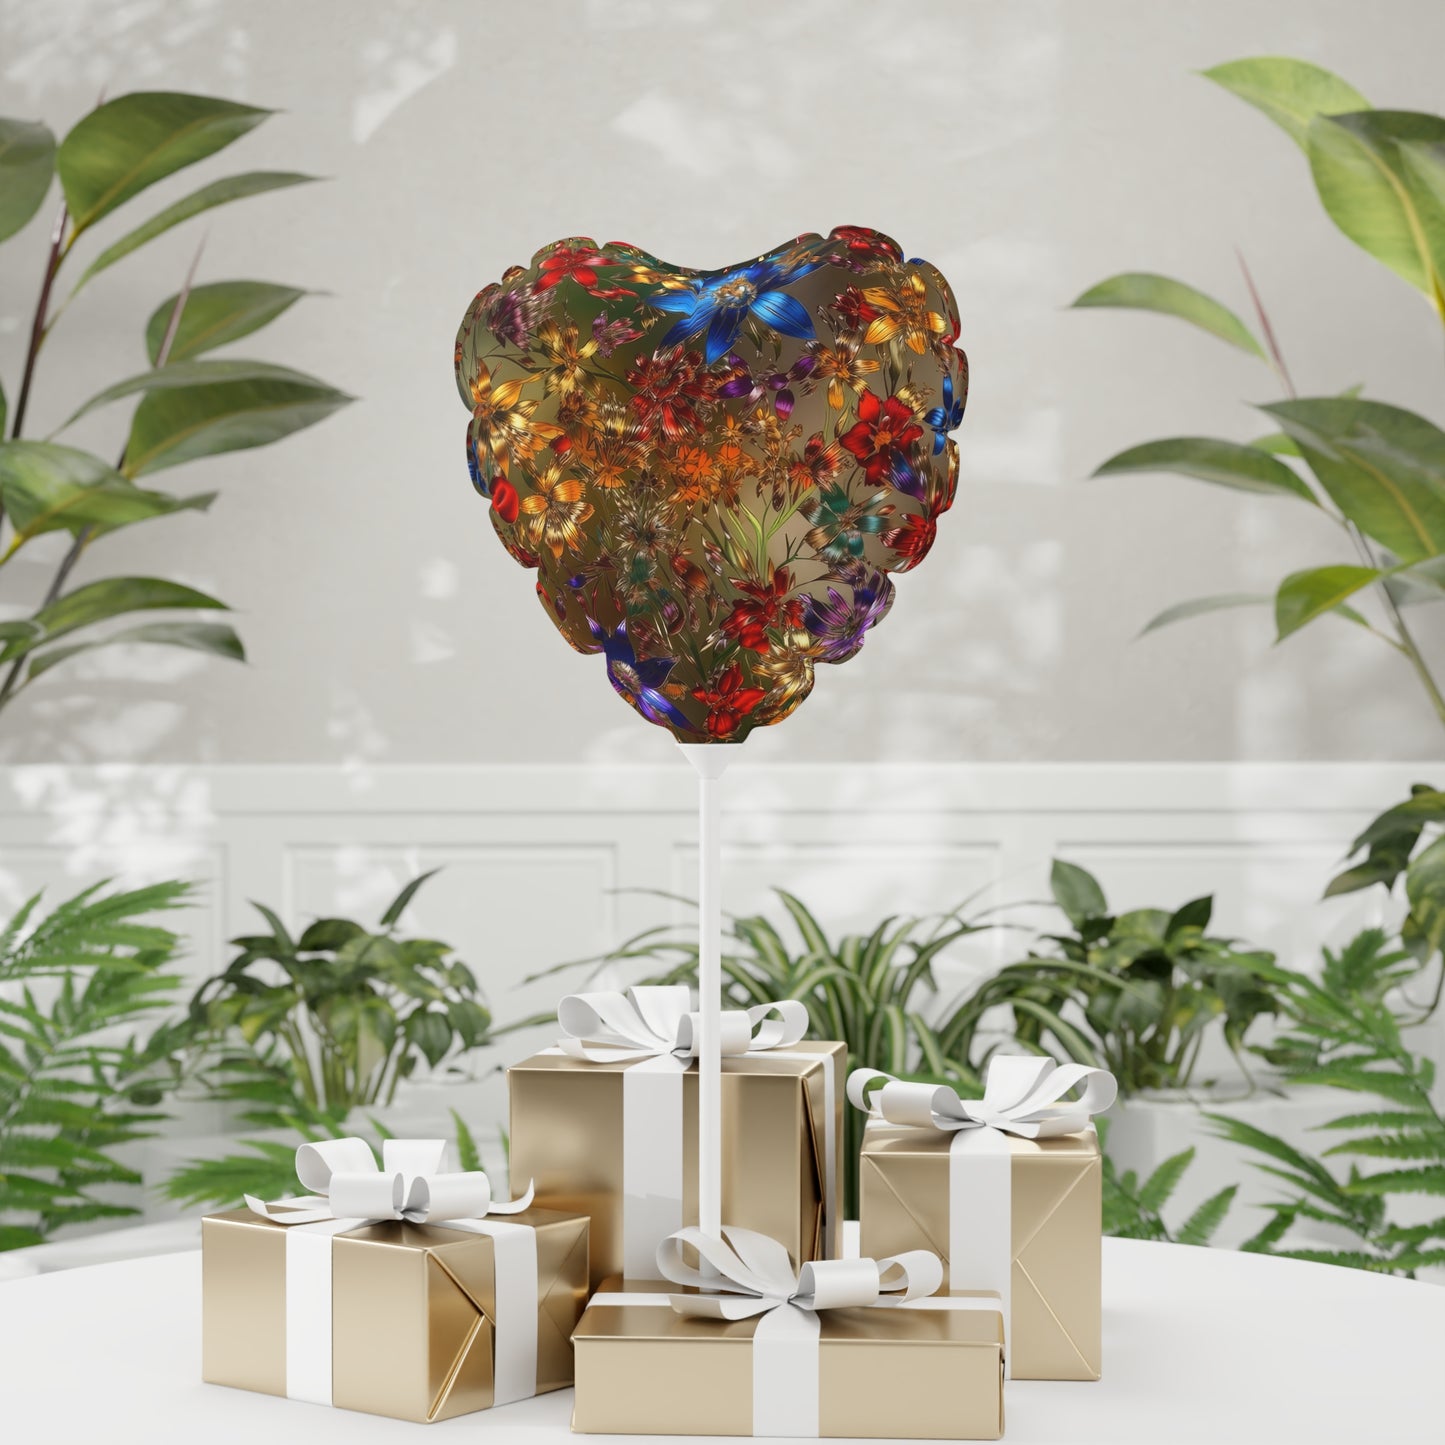 Bold & Beautiful & Metallic Wildflowers, Gorgeous floral Design, Style 1 Balloon (Round and Heart-shaped), 11"